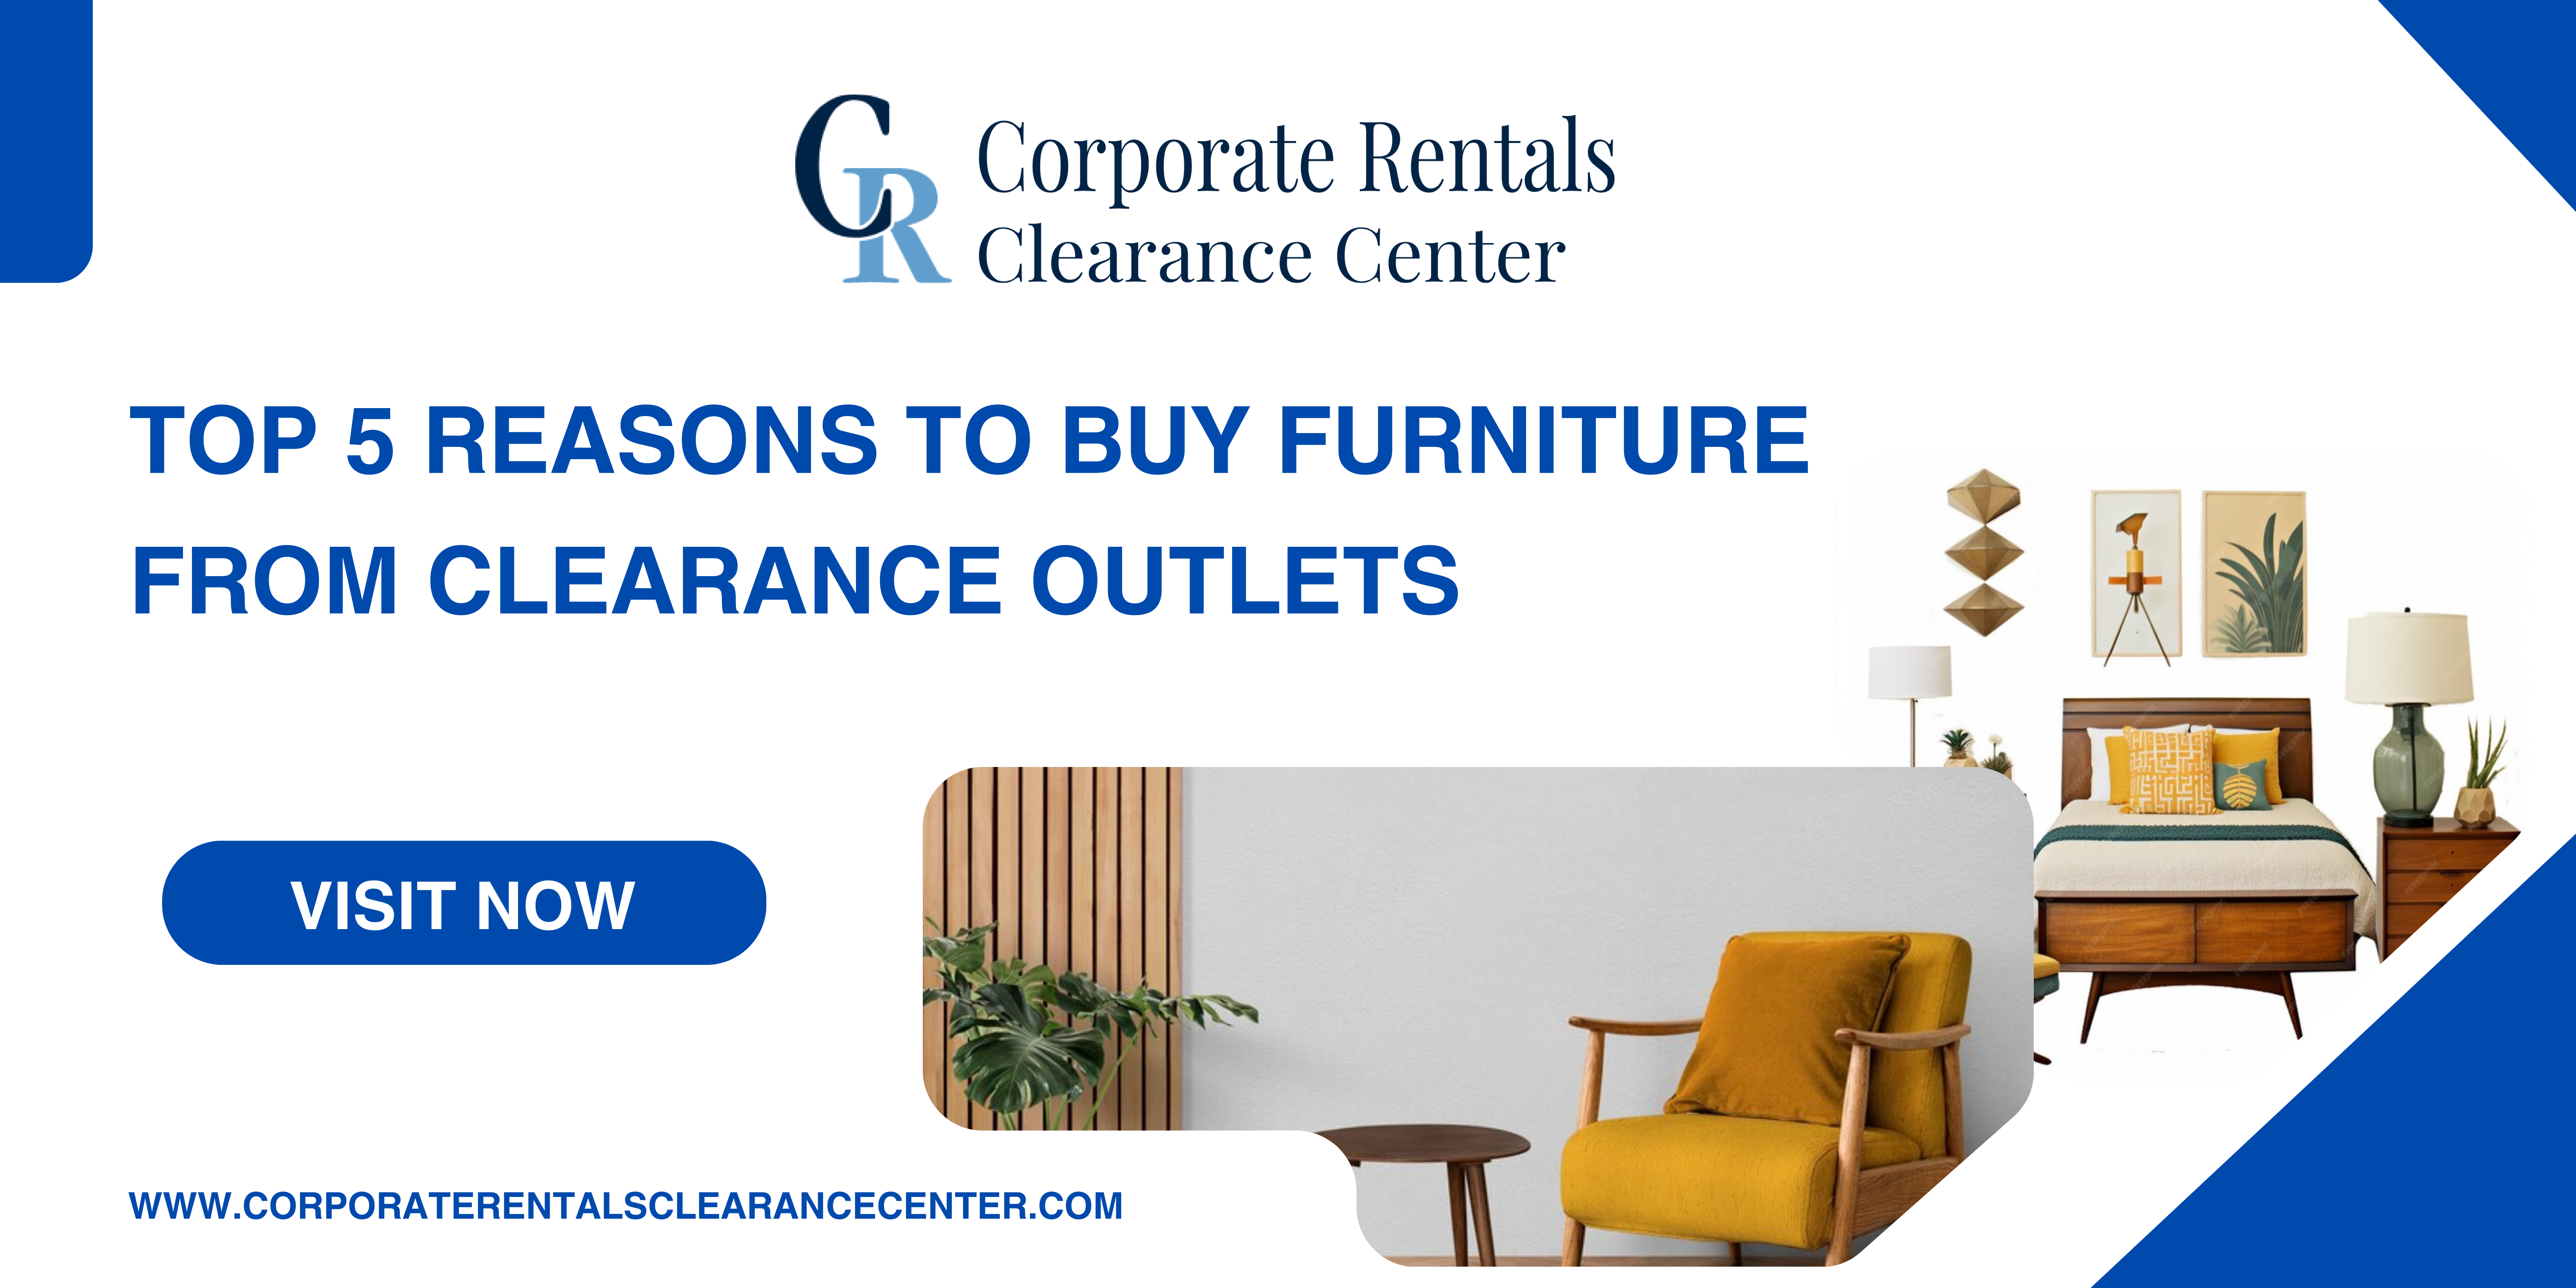 Top 5 Reasons to Buy Furniture From Clearance Outlets